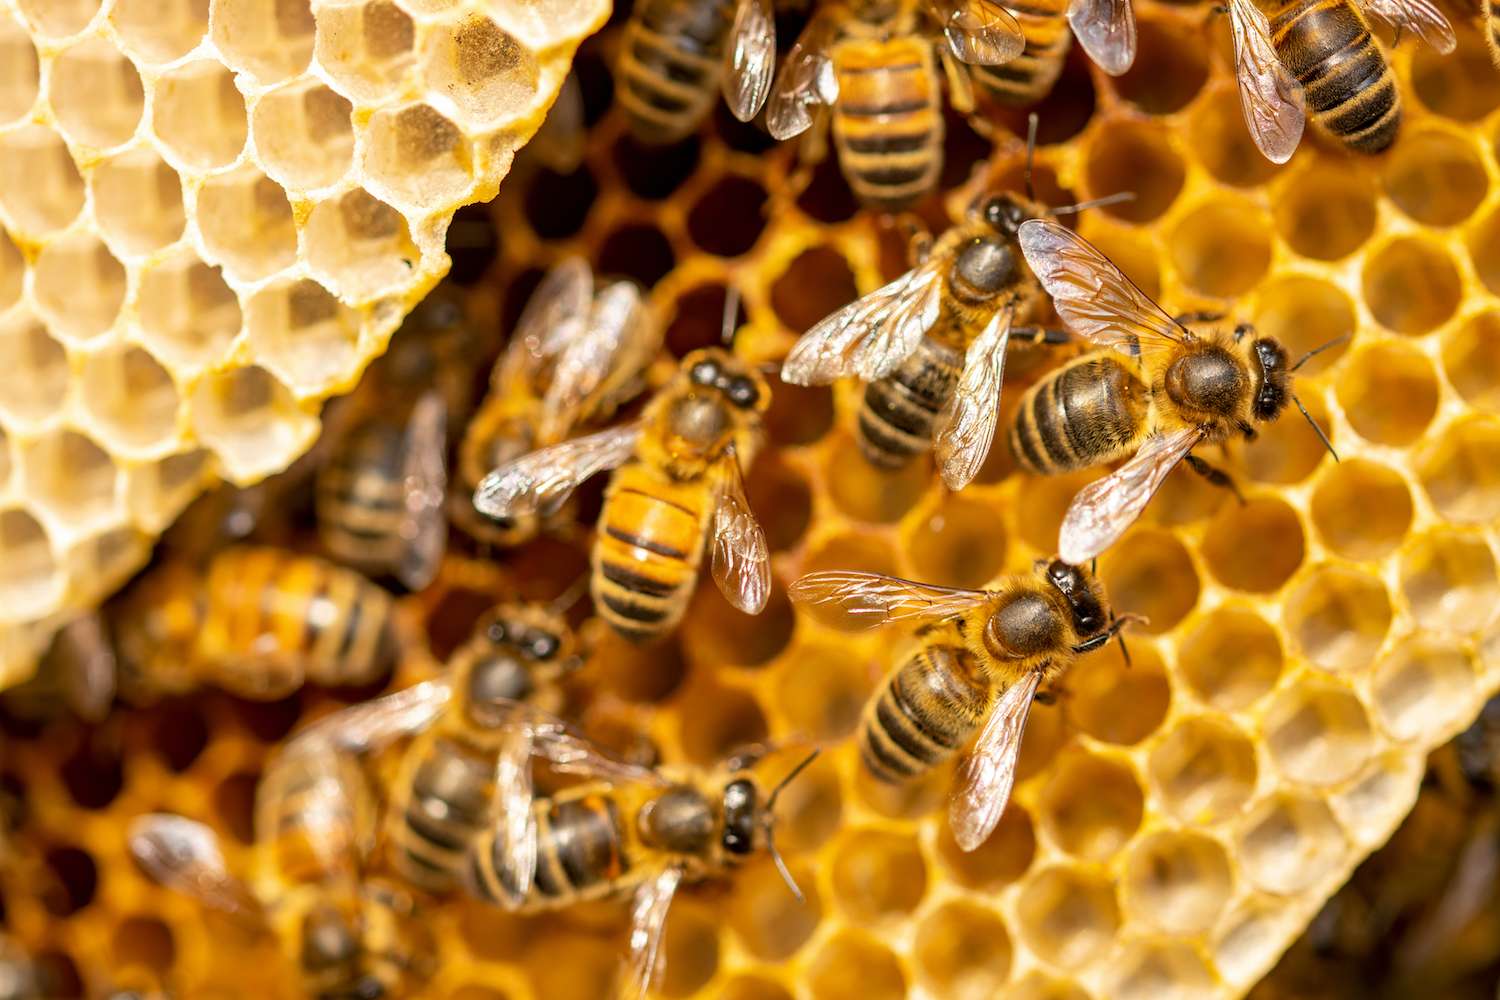 Macro shot of a bee hive on slices of honeycomb with a colony of wild Apis Mellifera Carnica or Western Honey Bees with vibrant yellow color tones